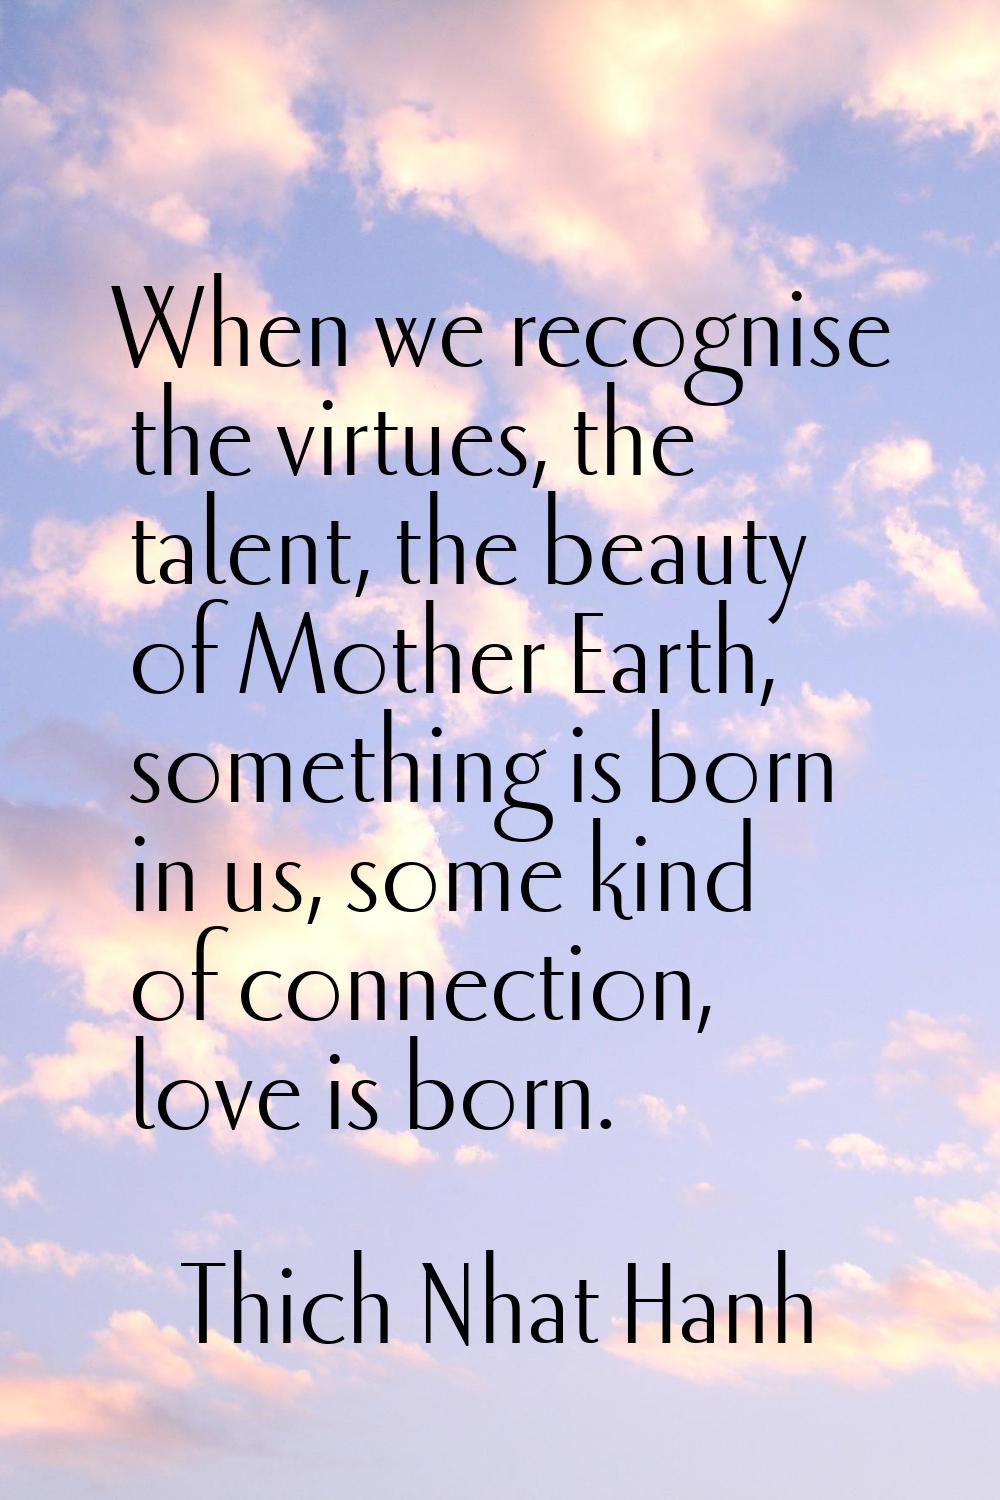 When we recognise the virtues, the talent, the beauty of Mother Earth, something is born in us, som